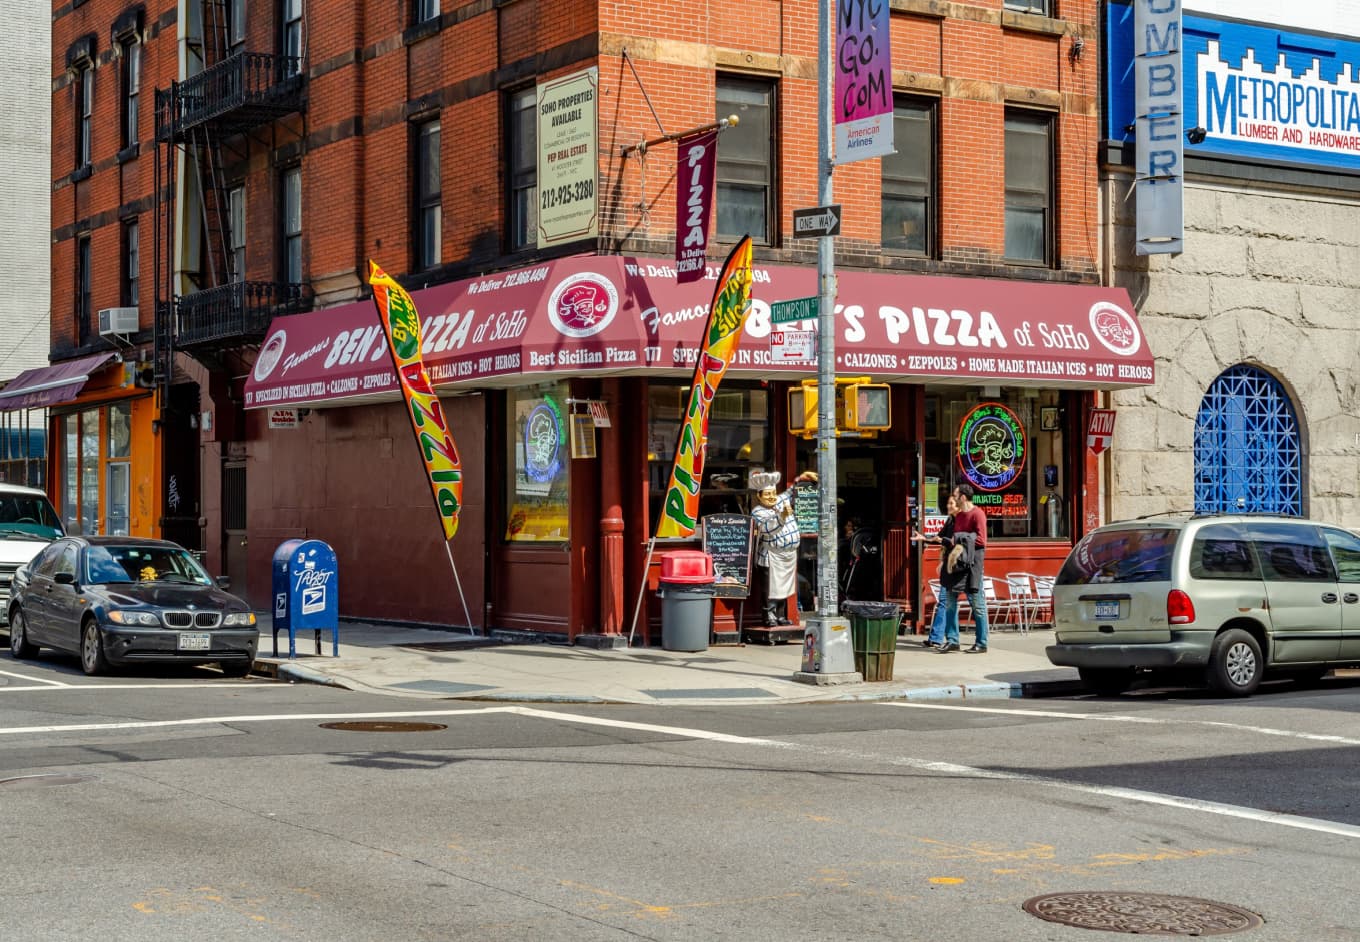 The Most FUN Pizza Place In New York State